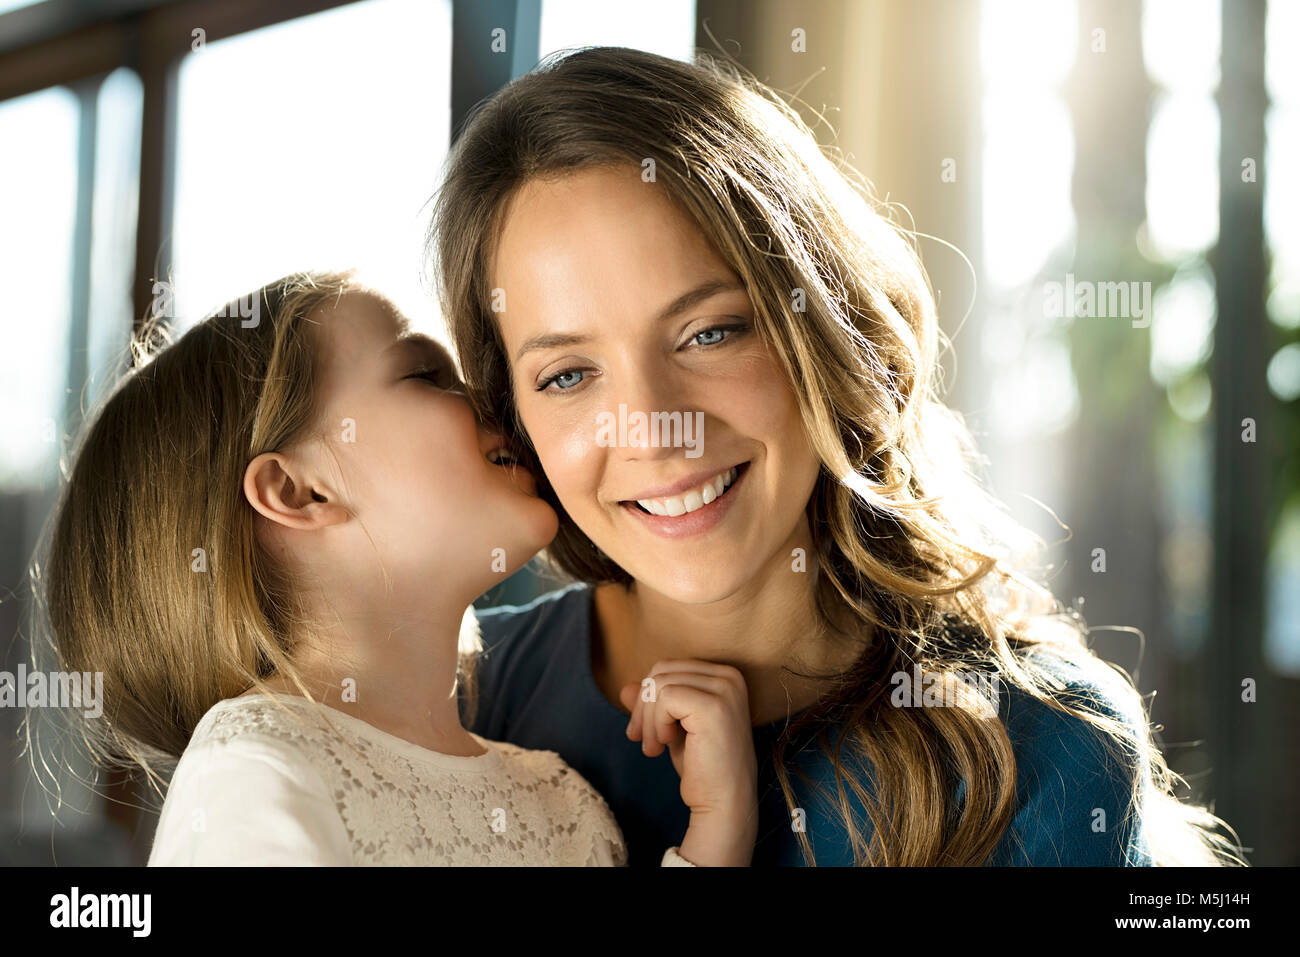 Smiling girl whispering into her mother's ear Stock Photo